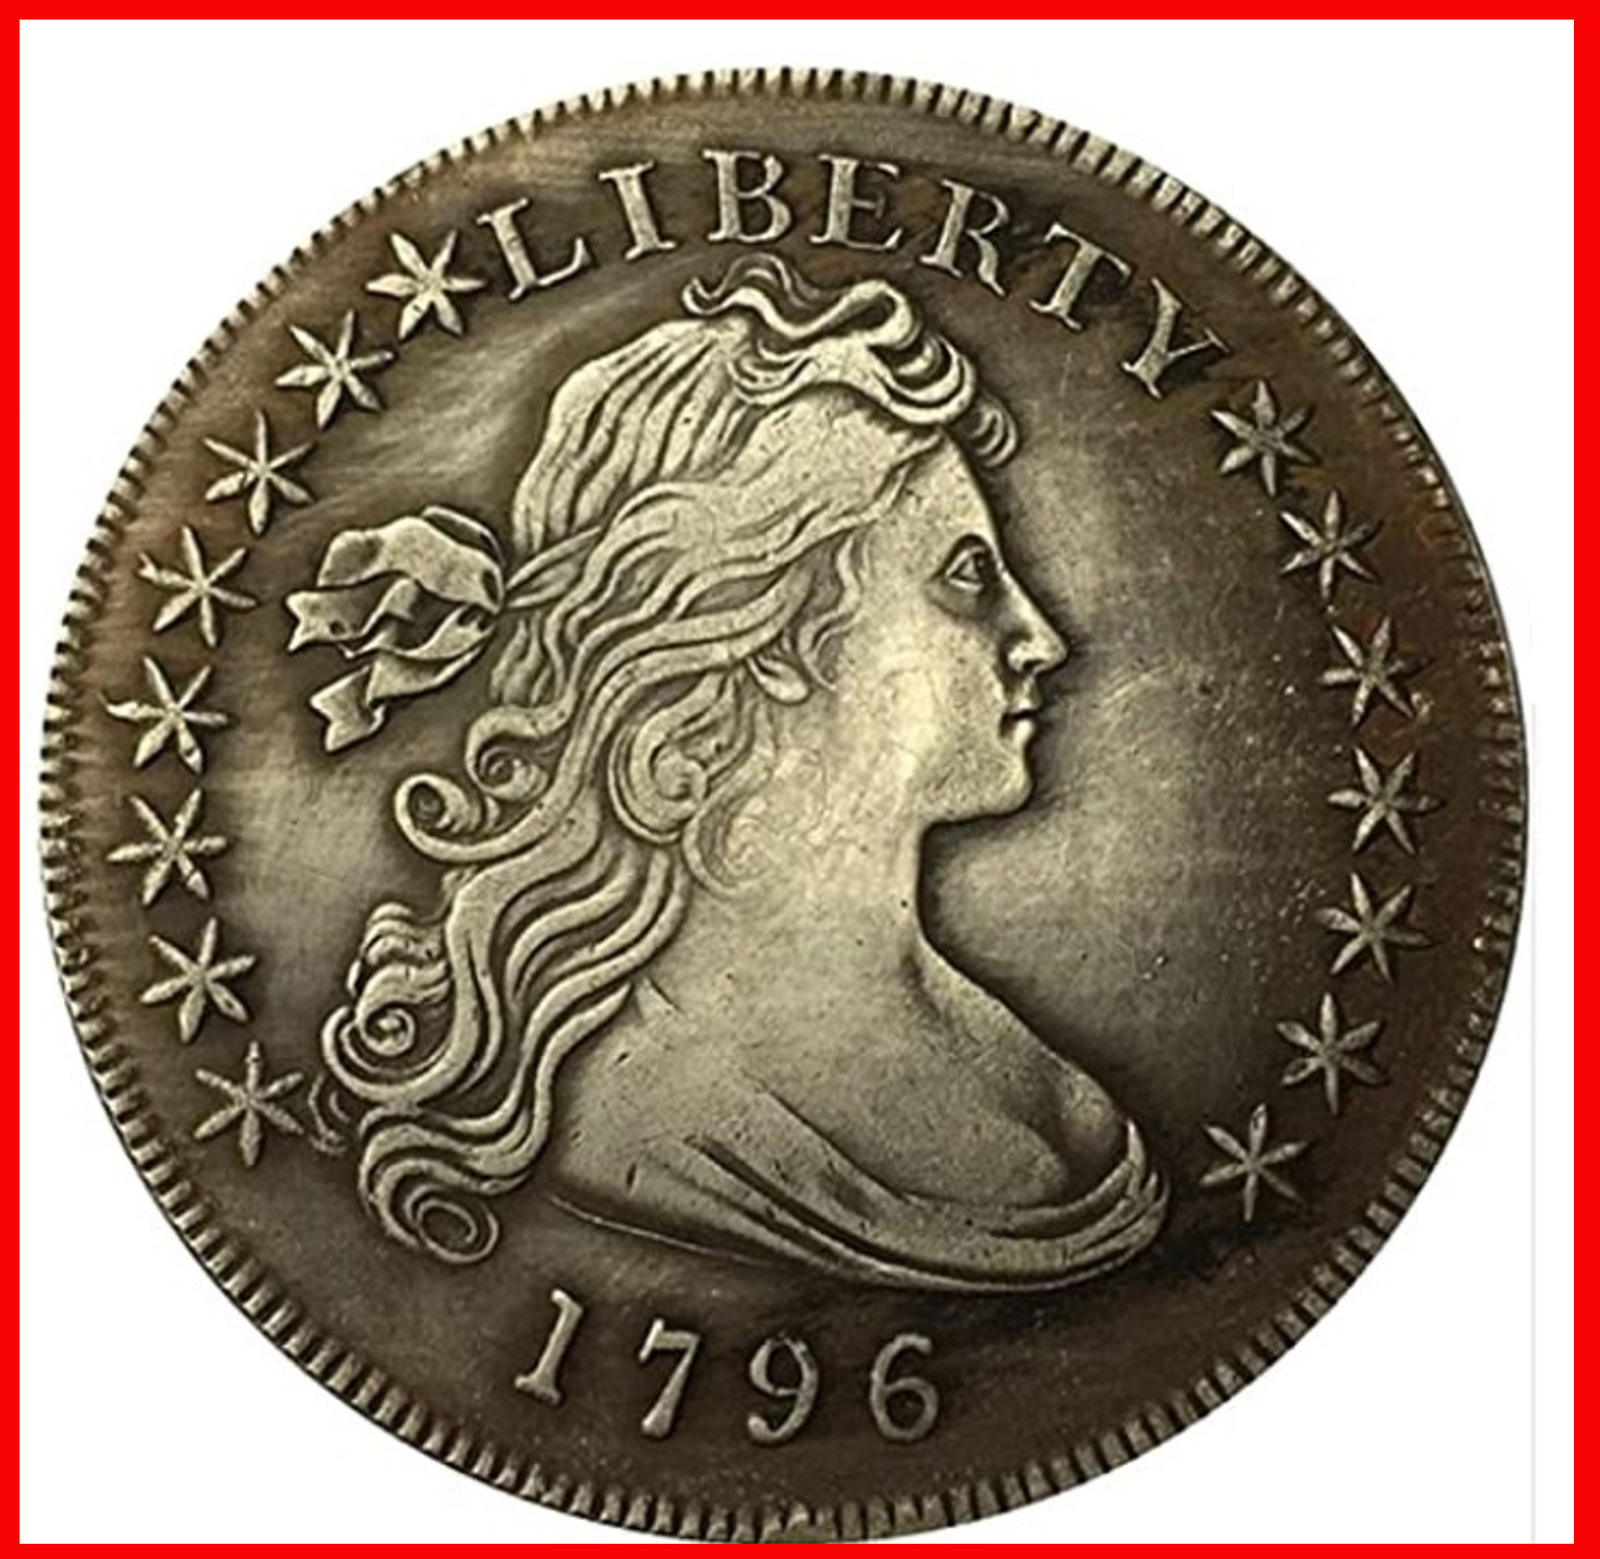 old american coins worth money